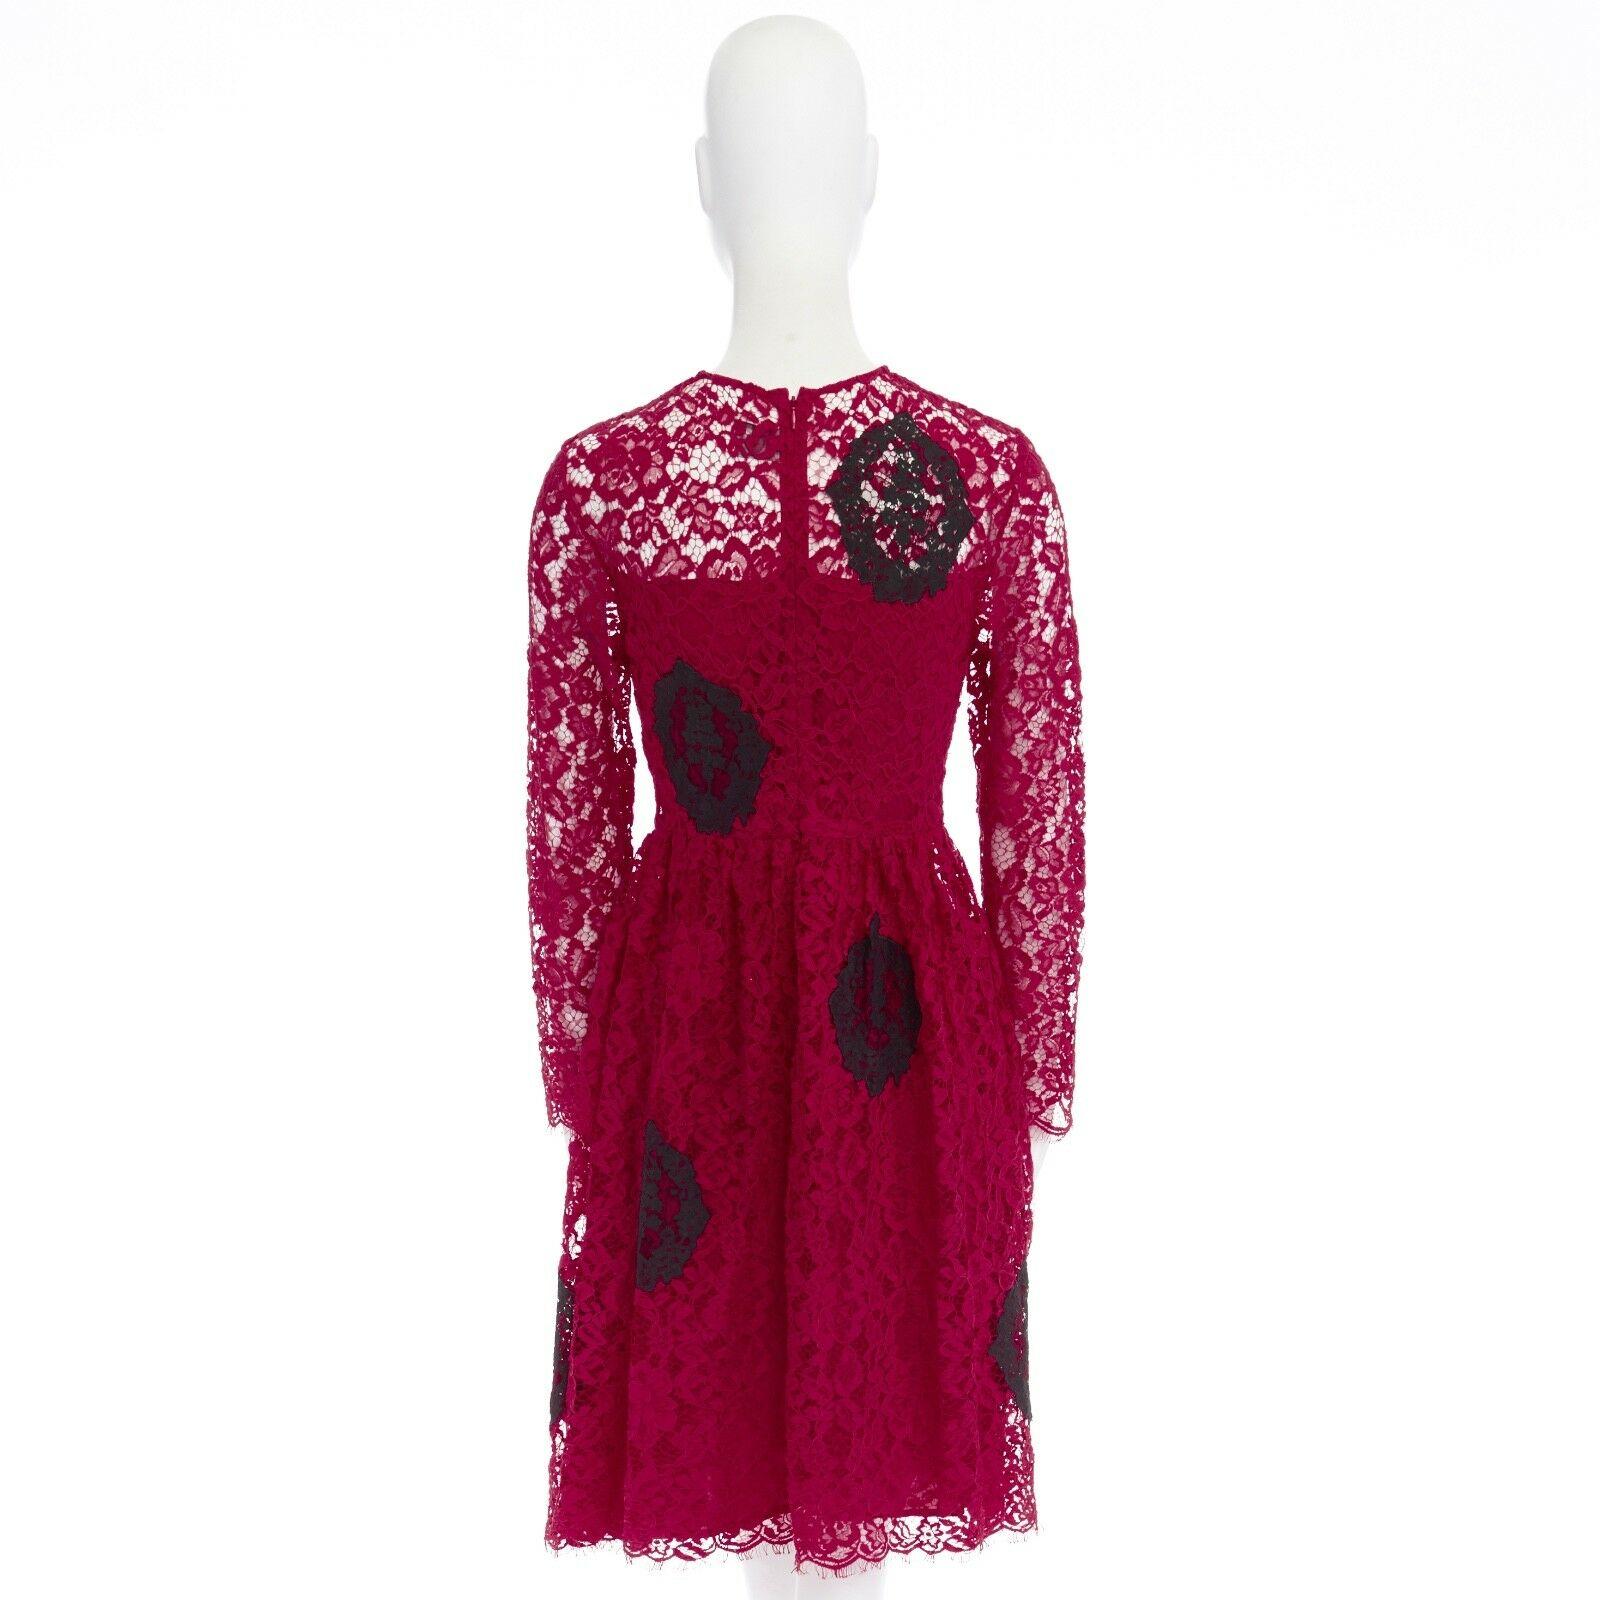 Women's HUISHAN ZHANG red floral embroidered lace black spot flared cocktail dress US4 S